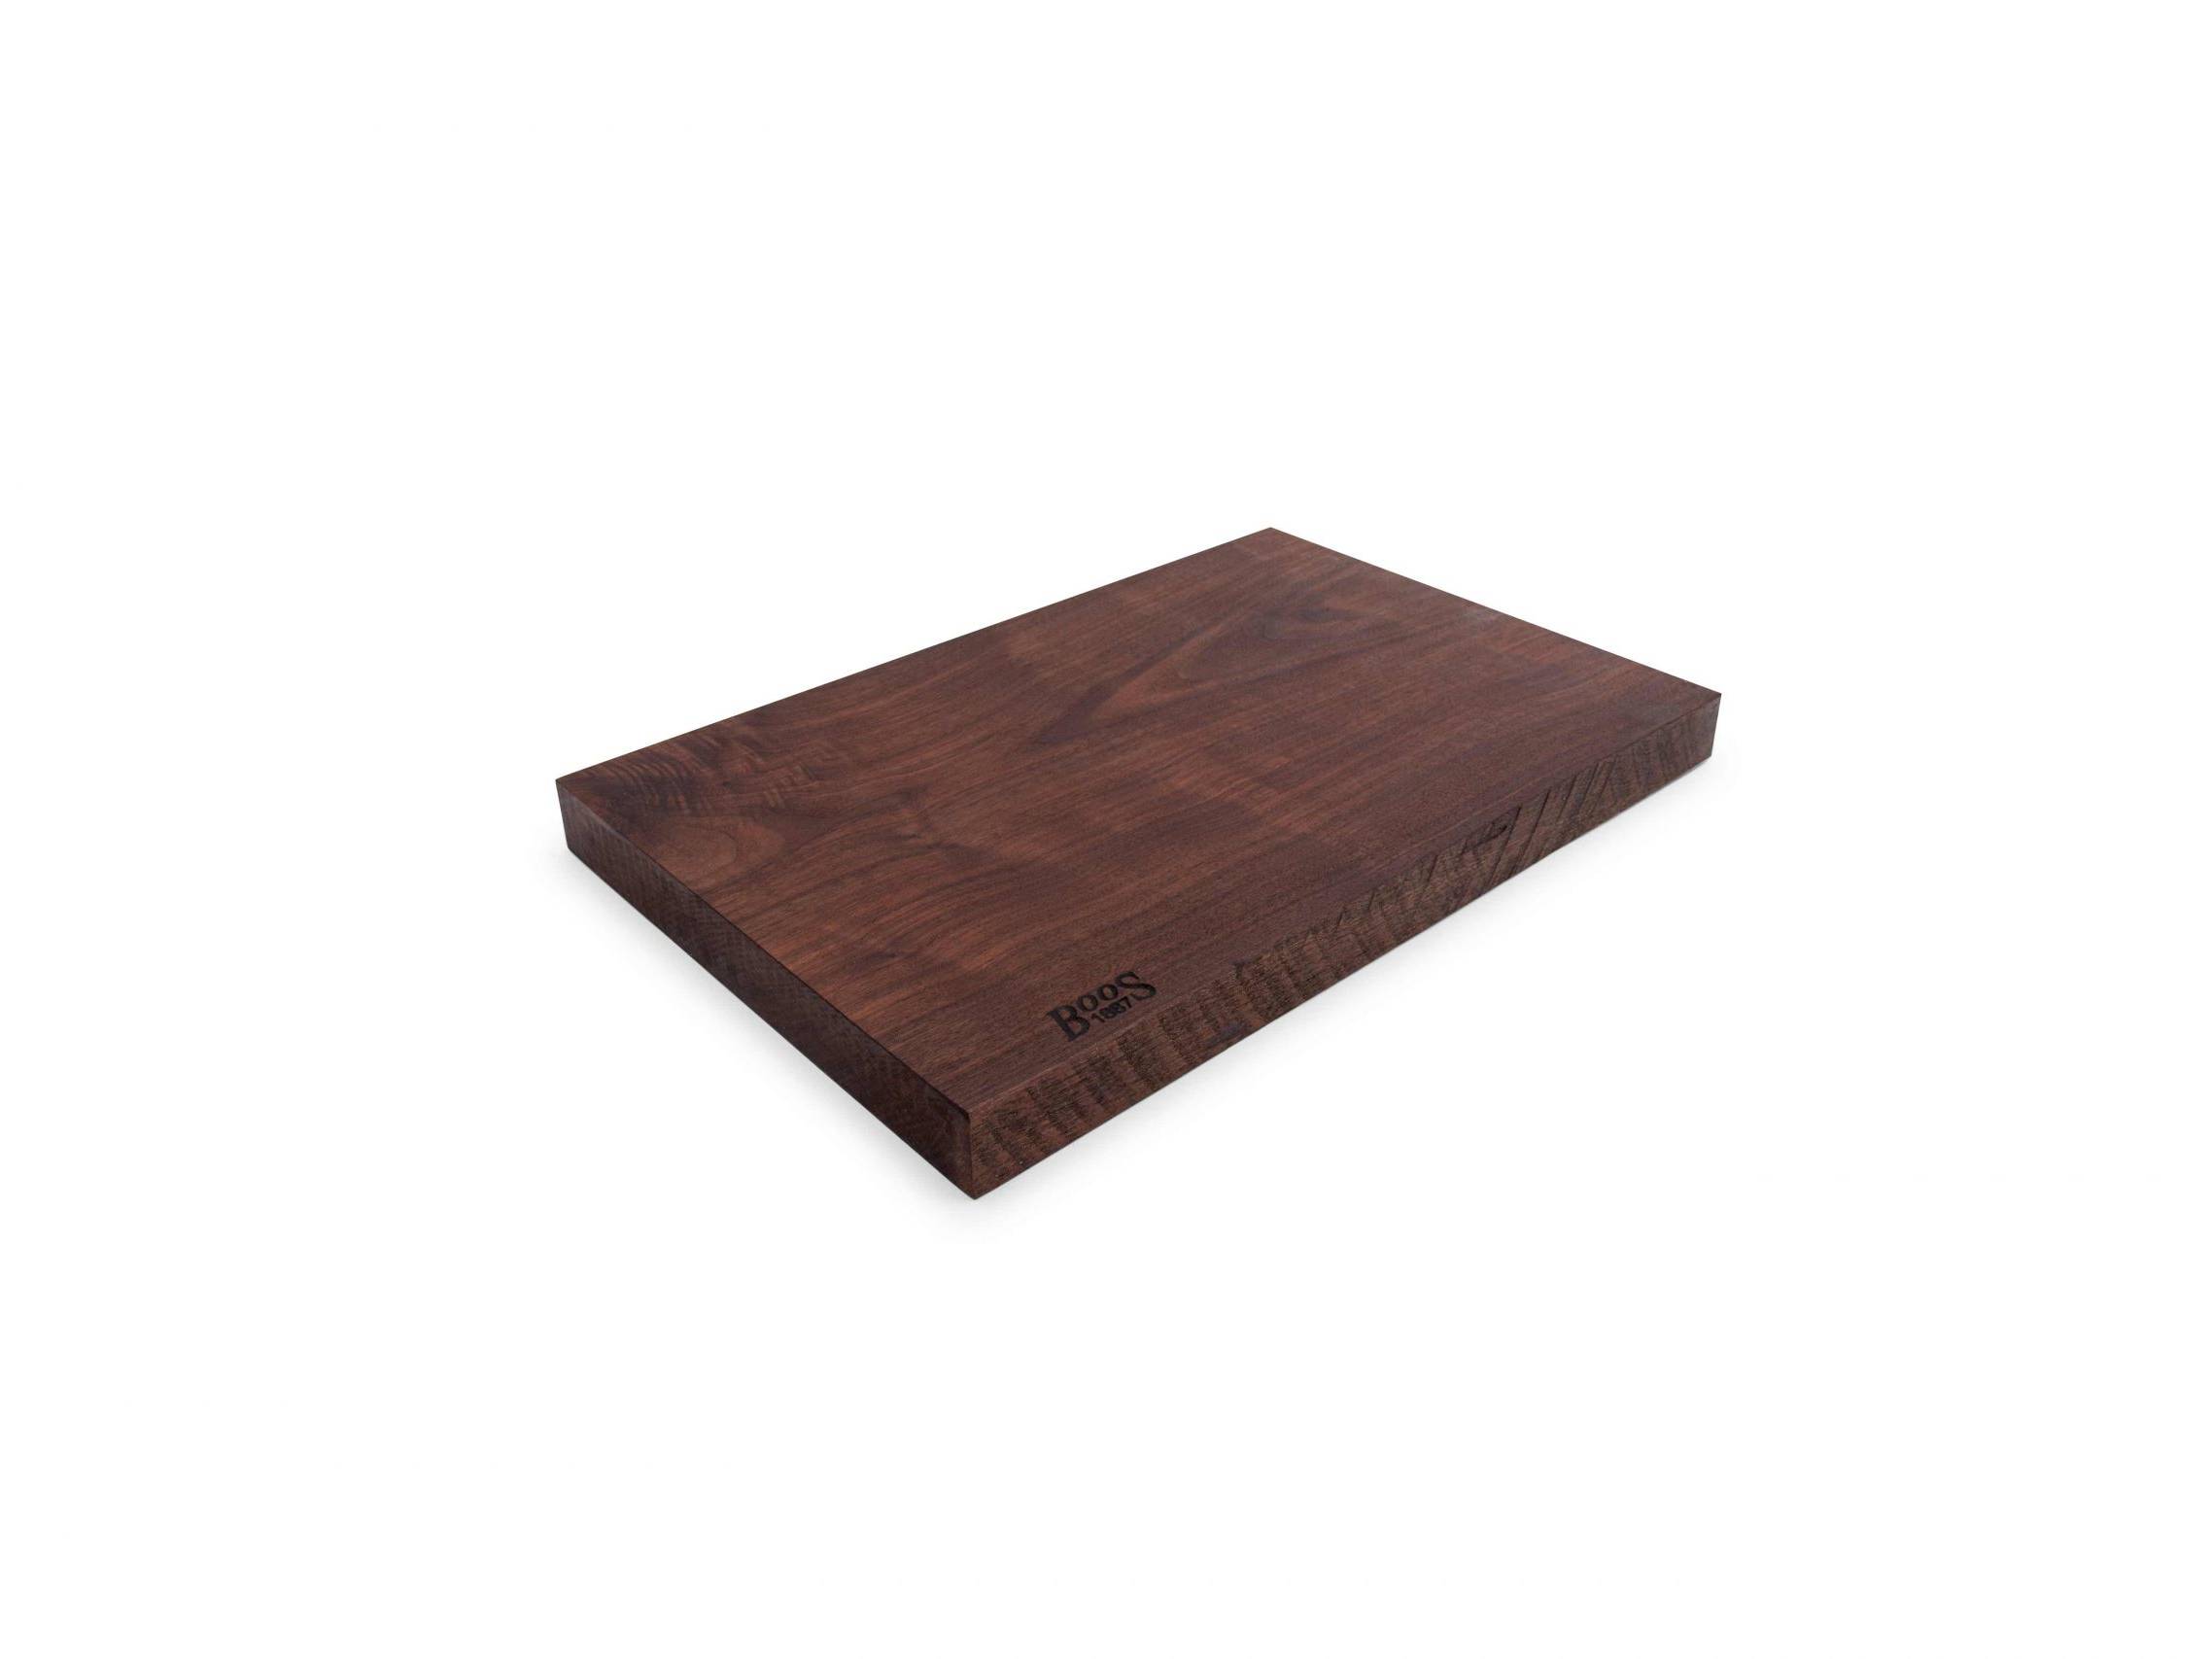 Boos 1887 / Rustic Edge one piece cutting board; Black Walnut; can be used on both sides 41